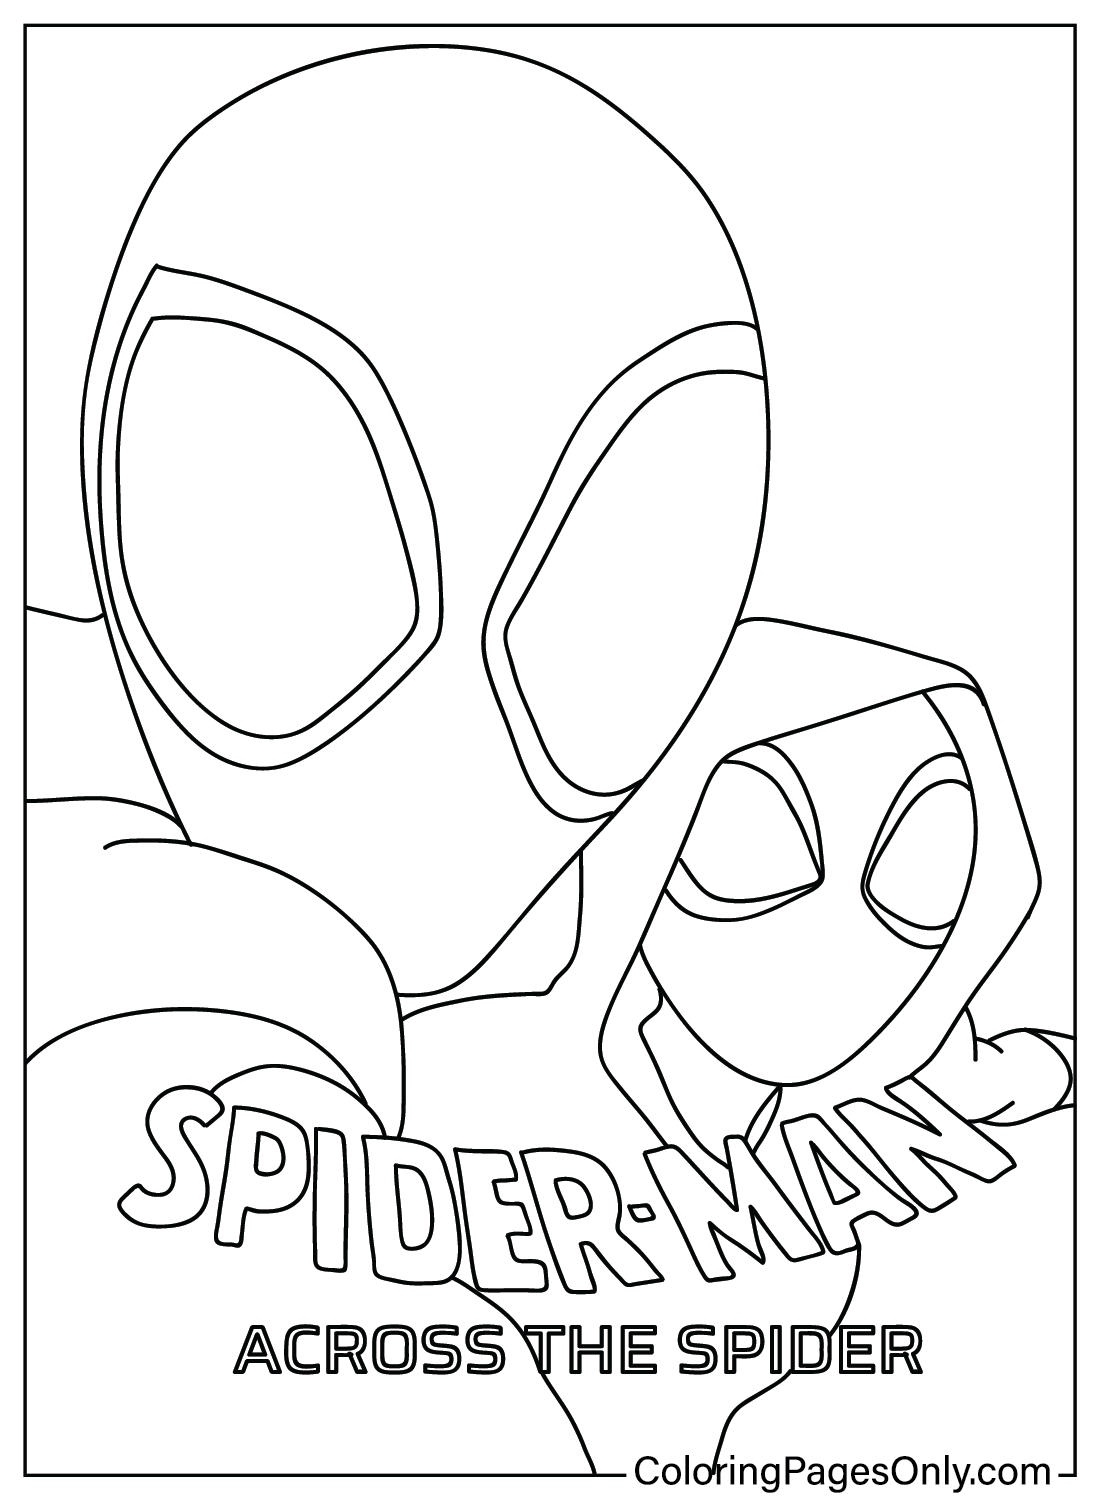 Spider-Man: Across the Spider disegno pagina a colori da Spider-Man: Across the Spider